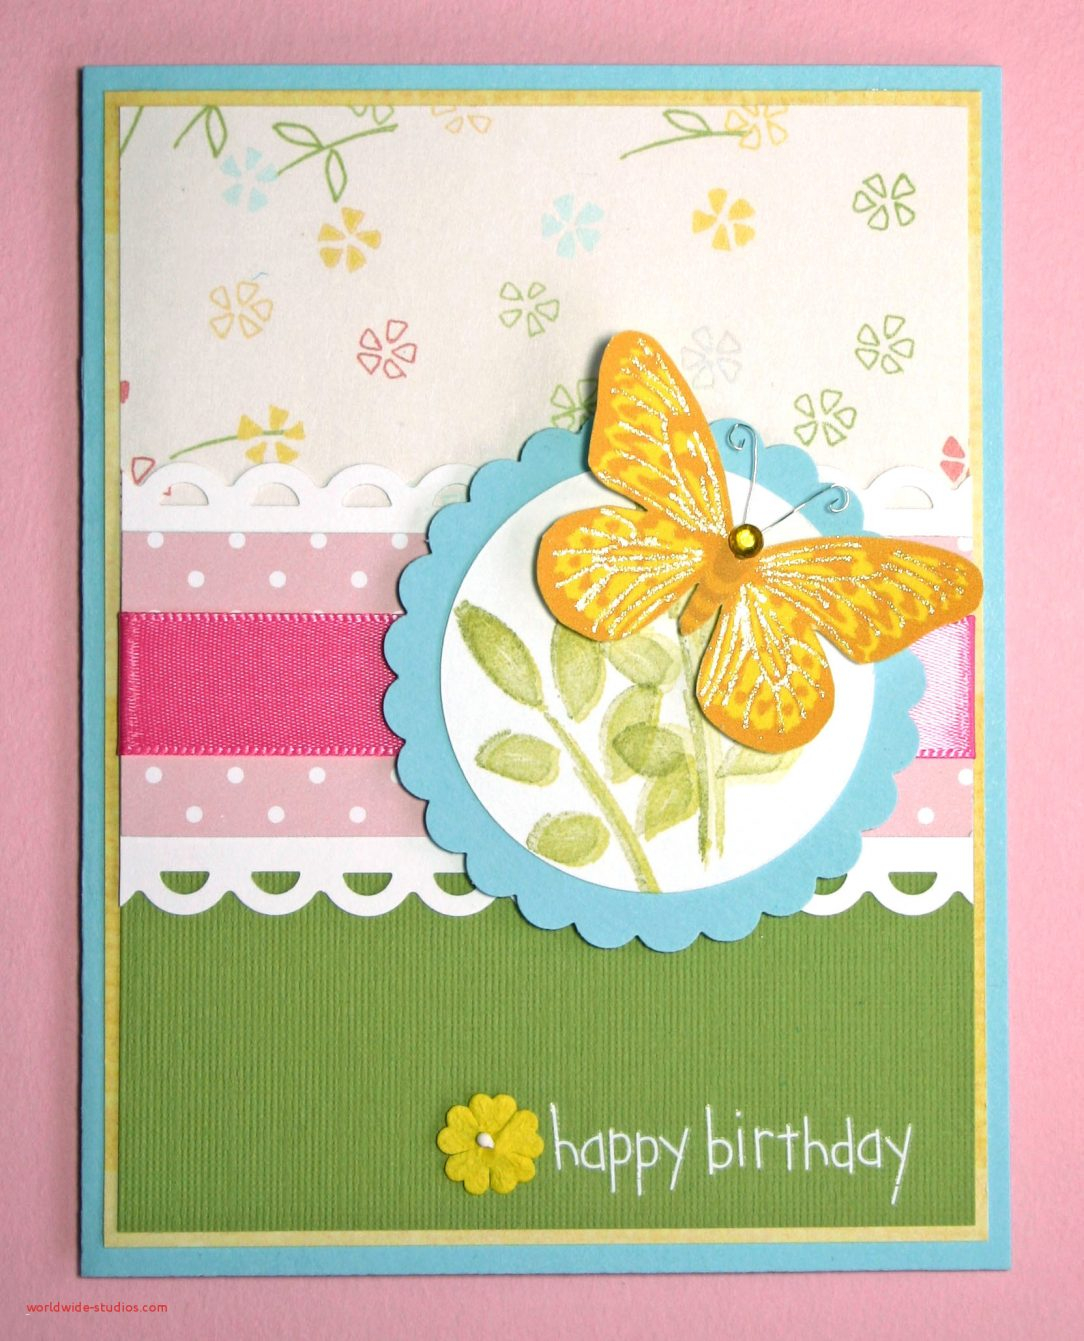 Idea Of Making Birthday Card Best Homemade Birthday Cards For Mom Ideas Making Envelopes Adults A